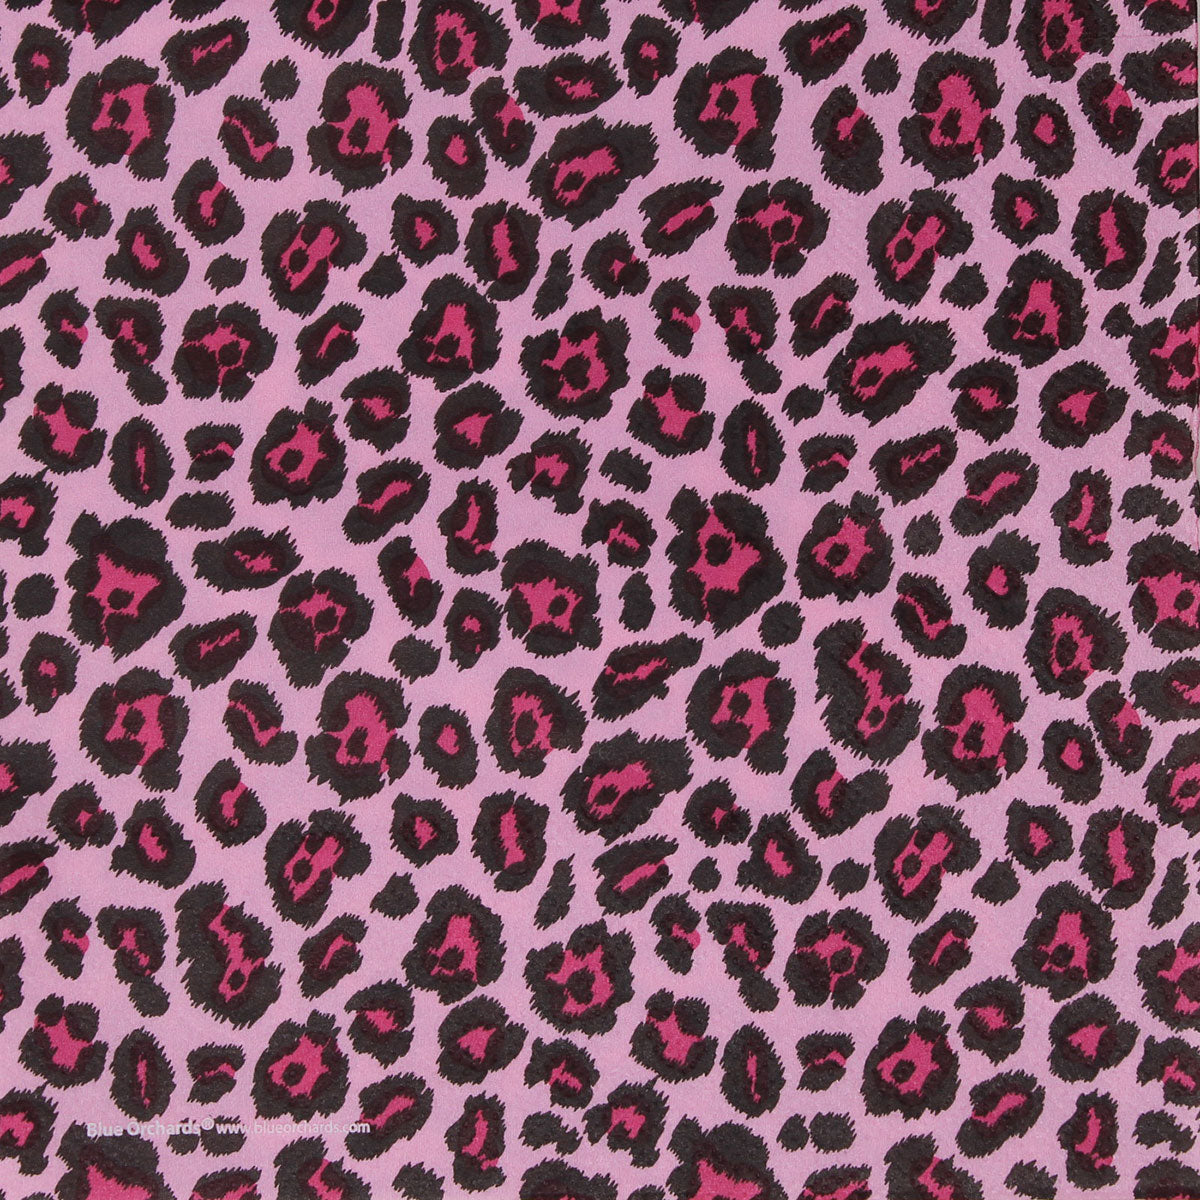  all items have a leopard print design that covers tableware just instead of brown it is hot pink